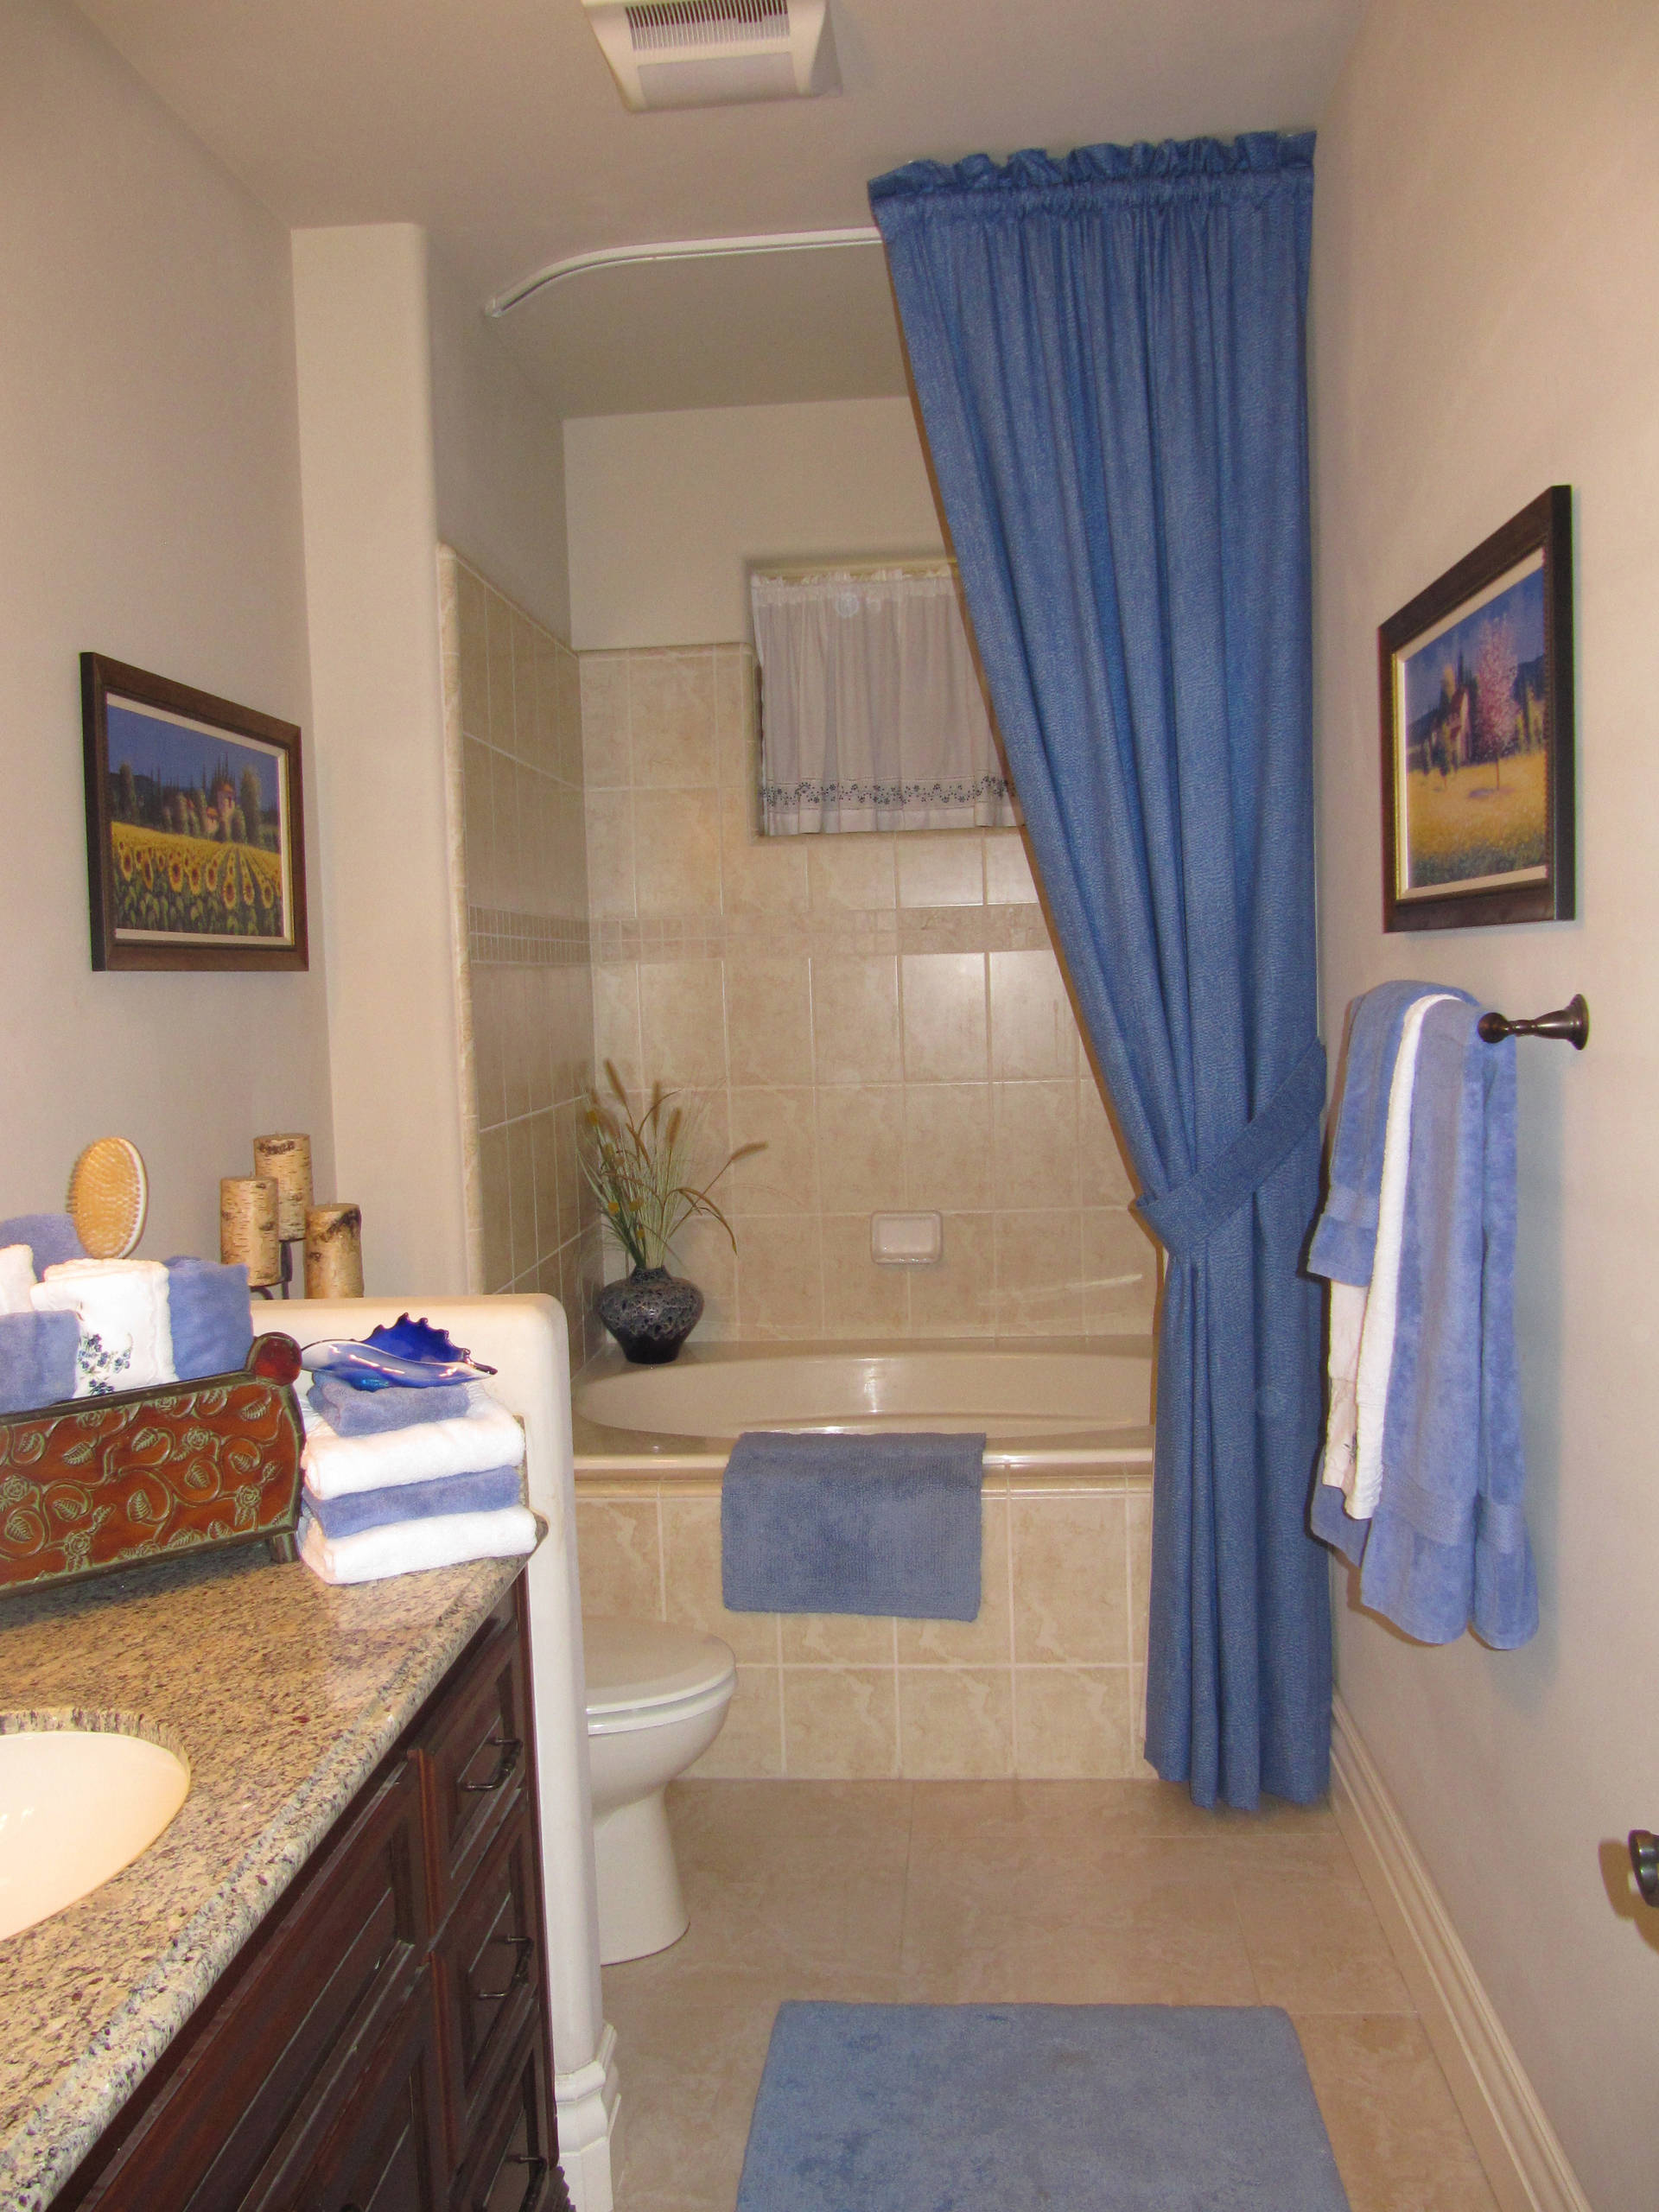 Curved Shower Rods Houzz, How To Install A Curved Shower Curtain Rod On Tile Floor